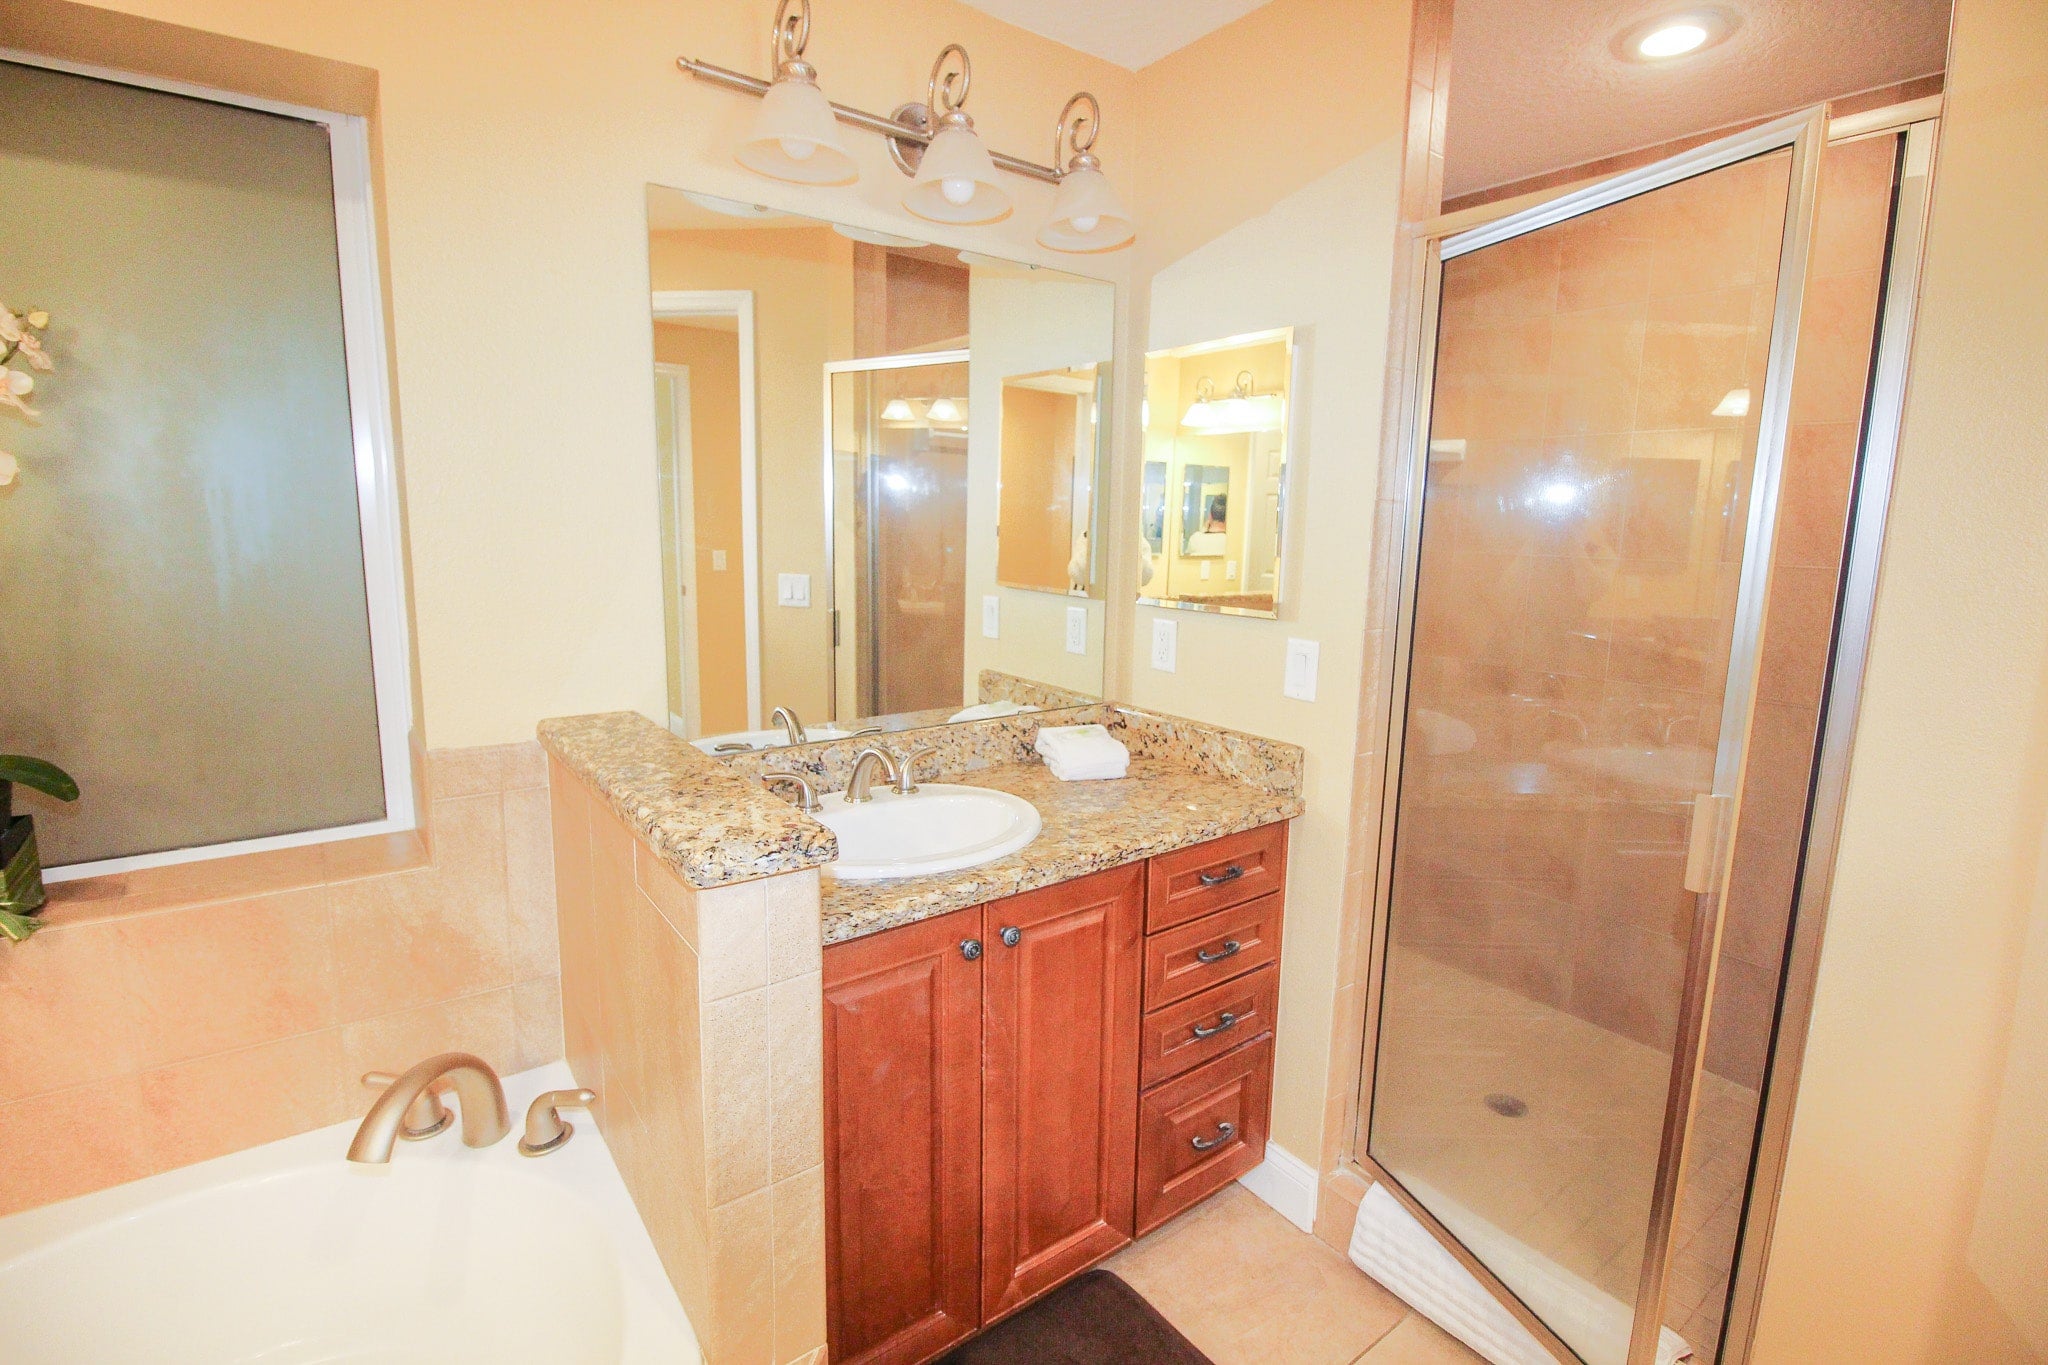 Double sinks and walk-in shower